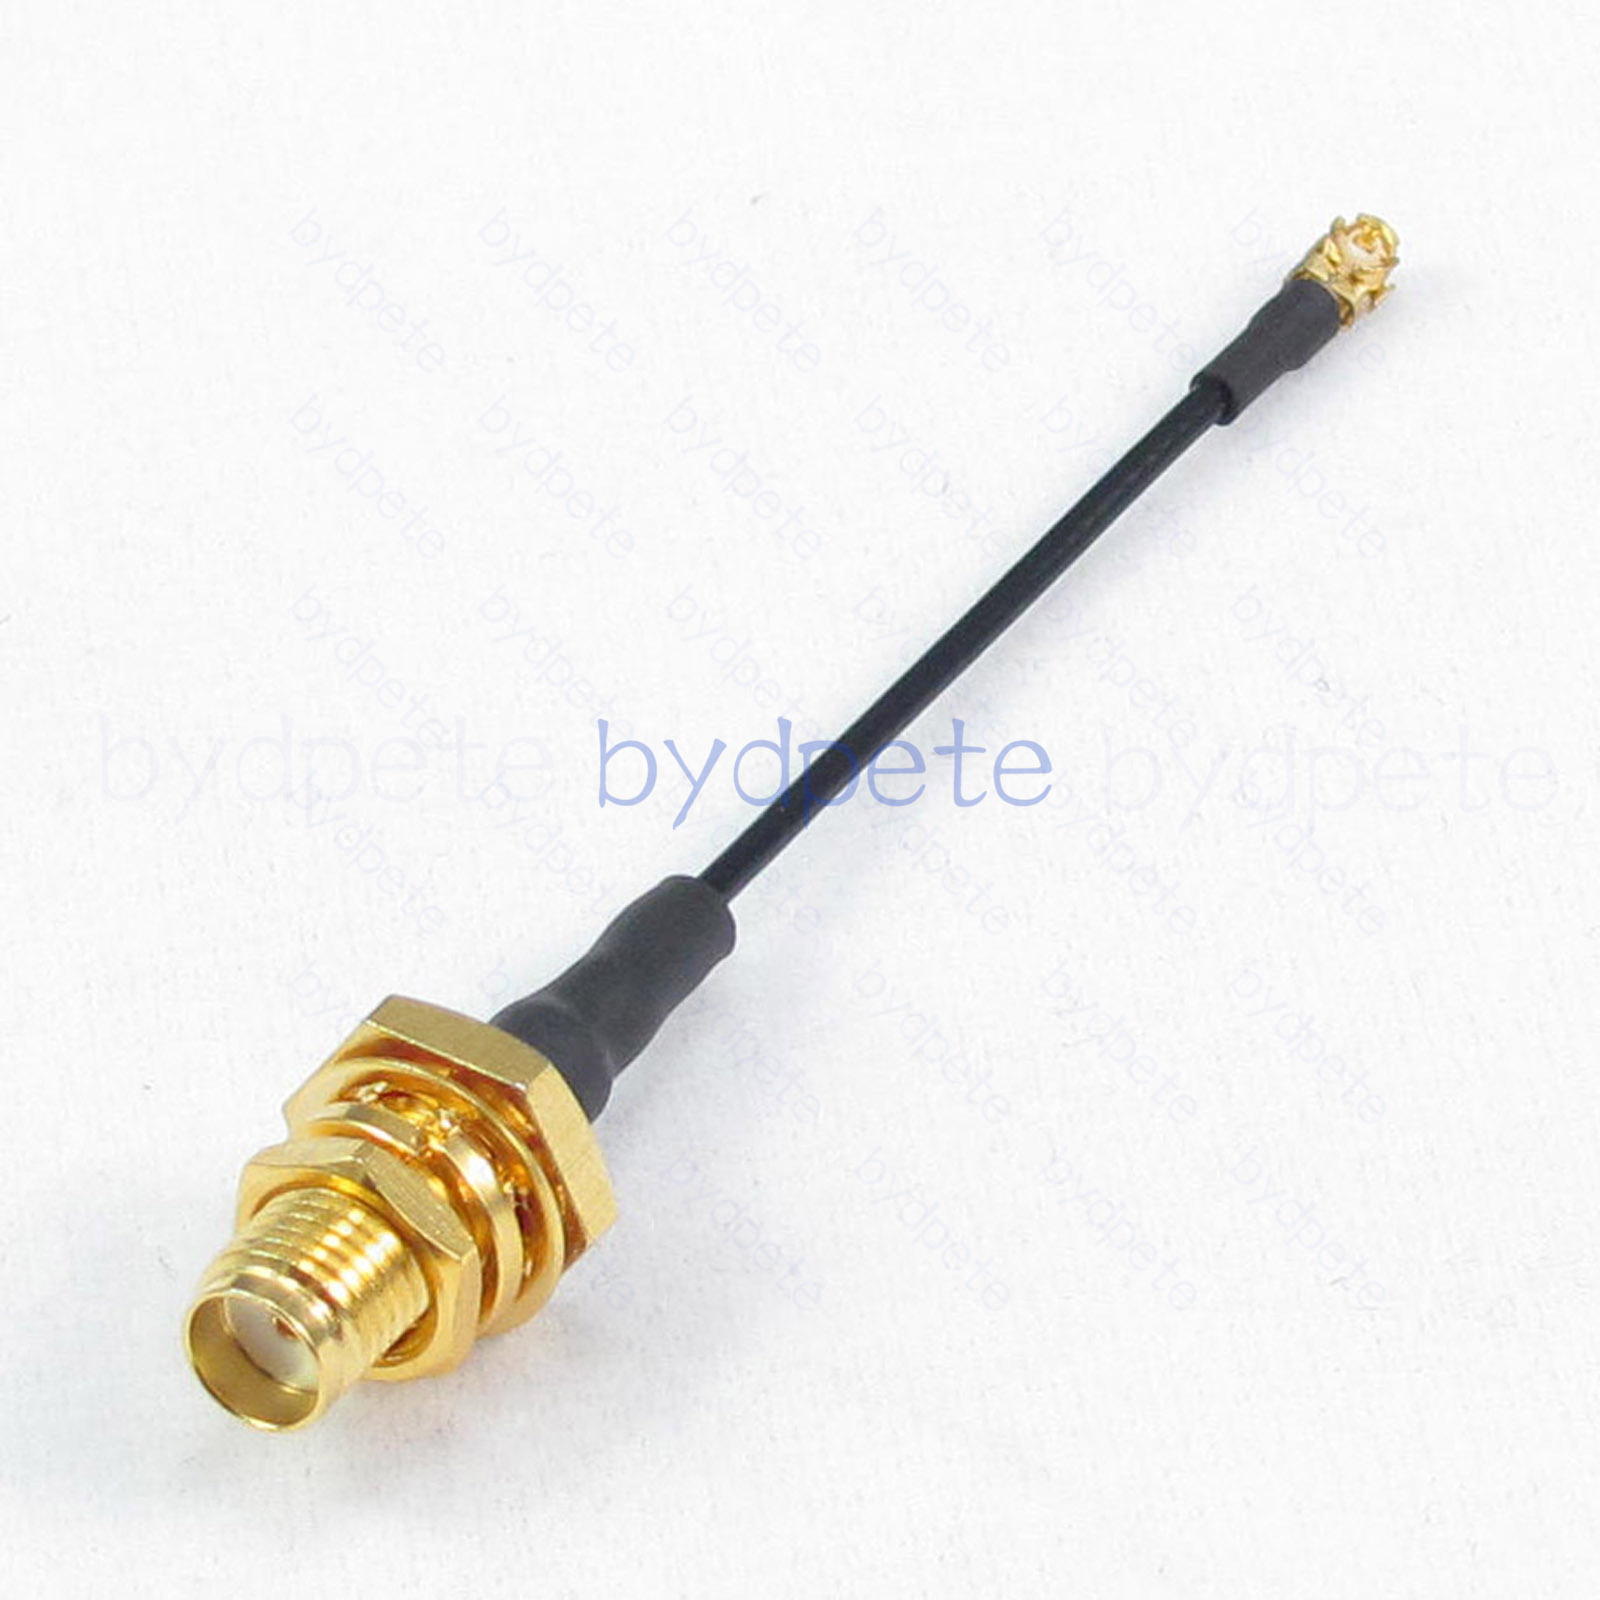 MHF SW-23 SW23 Micro RF coax to SMA female bulk head 1.37mm cable 50ohm IPX IPEX bydpete